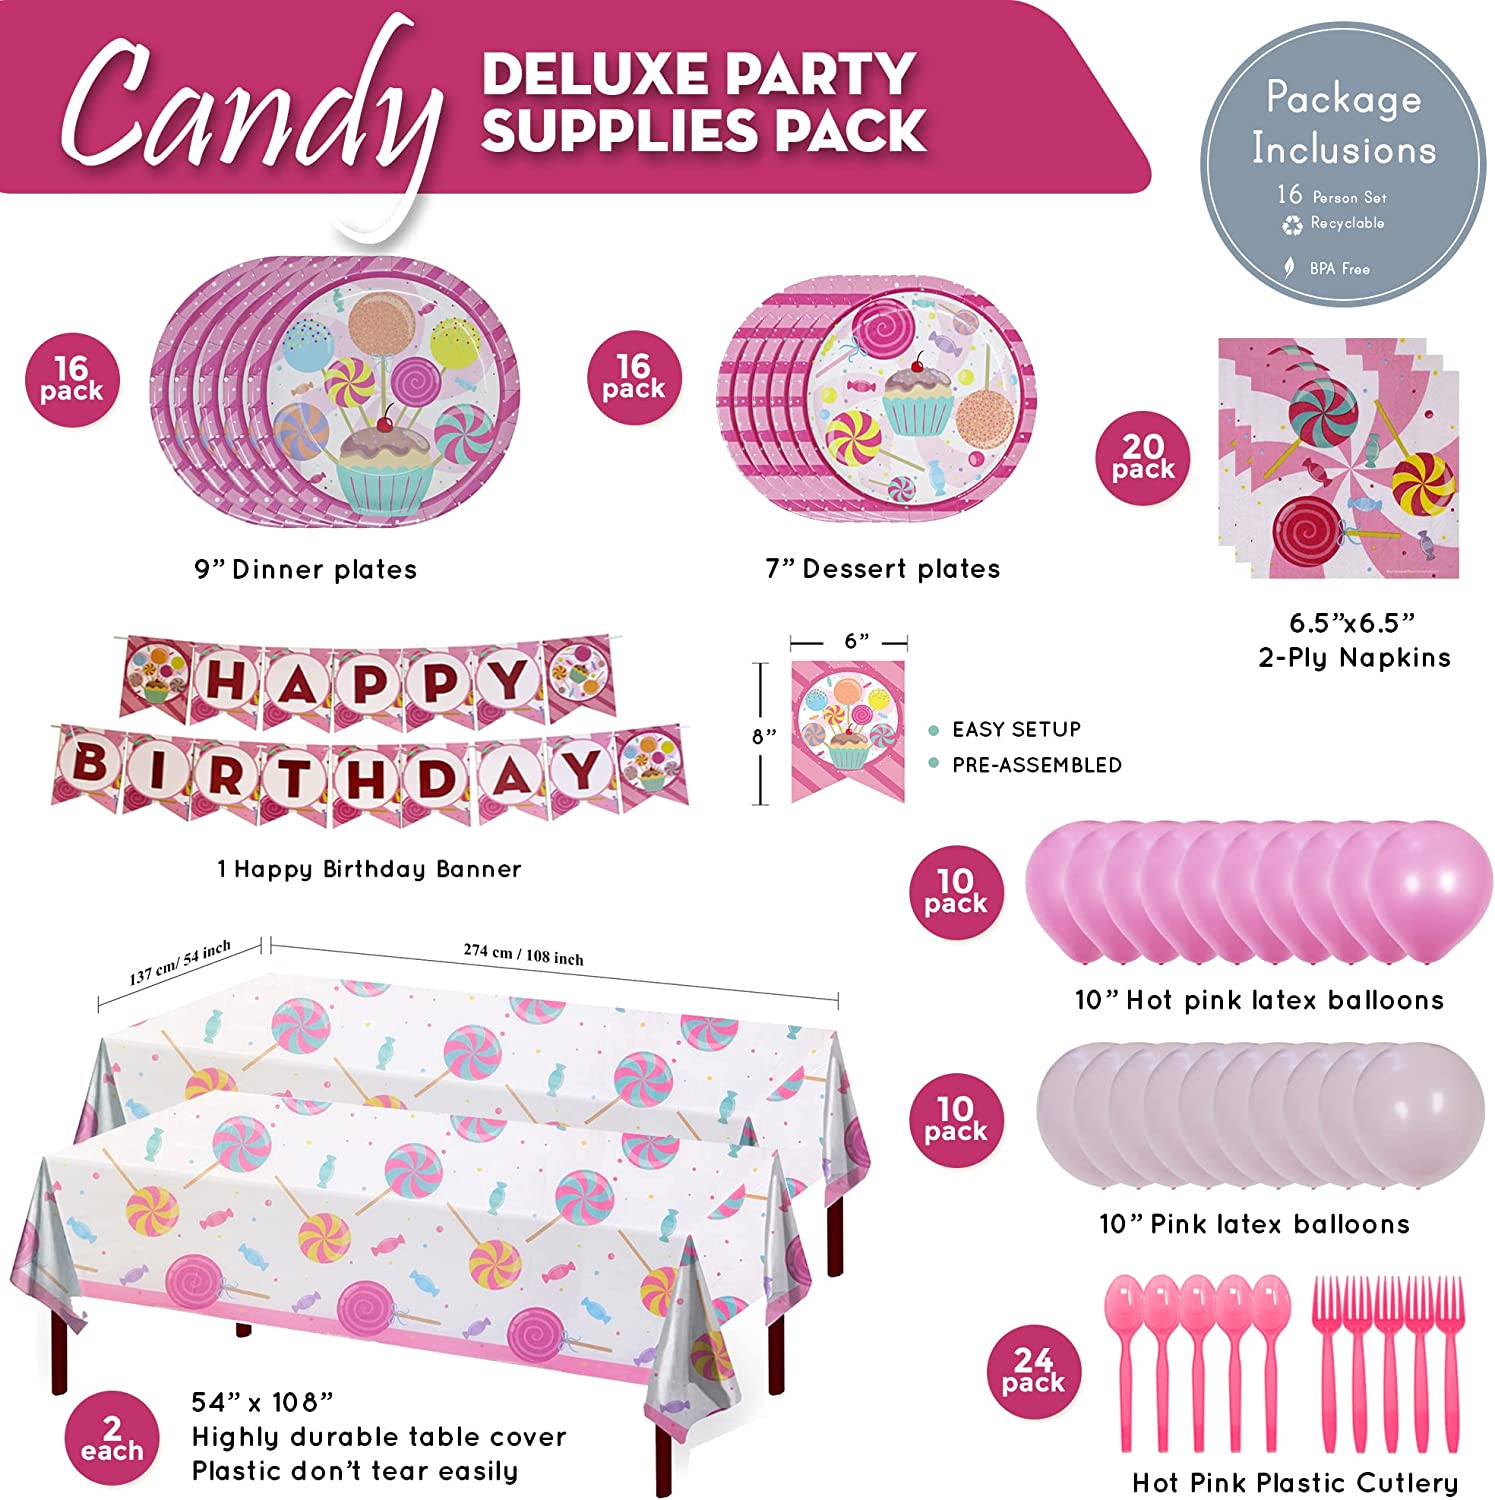 16 9-inch paper dinner plates, 16 7-inch paper dessert plates, 20 paper lunch napkins, 1 Happy Birthday Banner, 2 108” x 54” plastic table covers, 10 pink balloons, 10 hot pink balloons, 24 hot pink plastic forks, and 24 hot pink plastic spoons